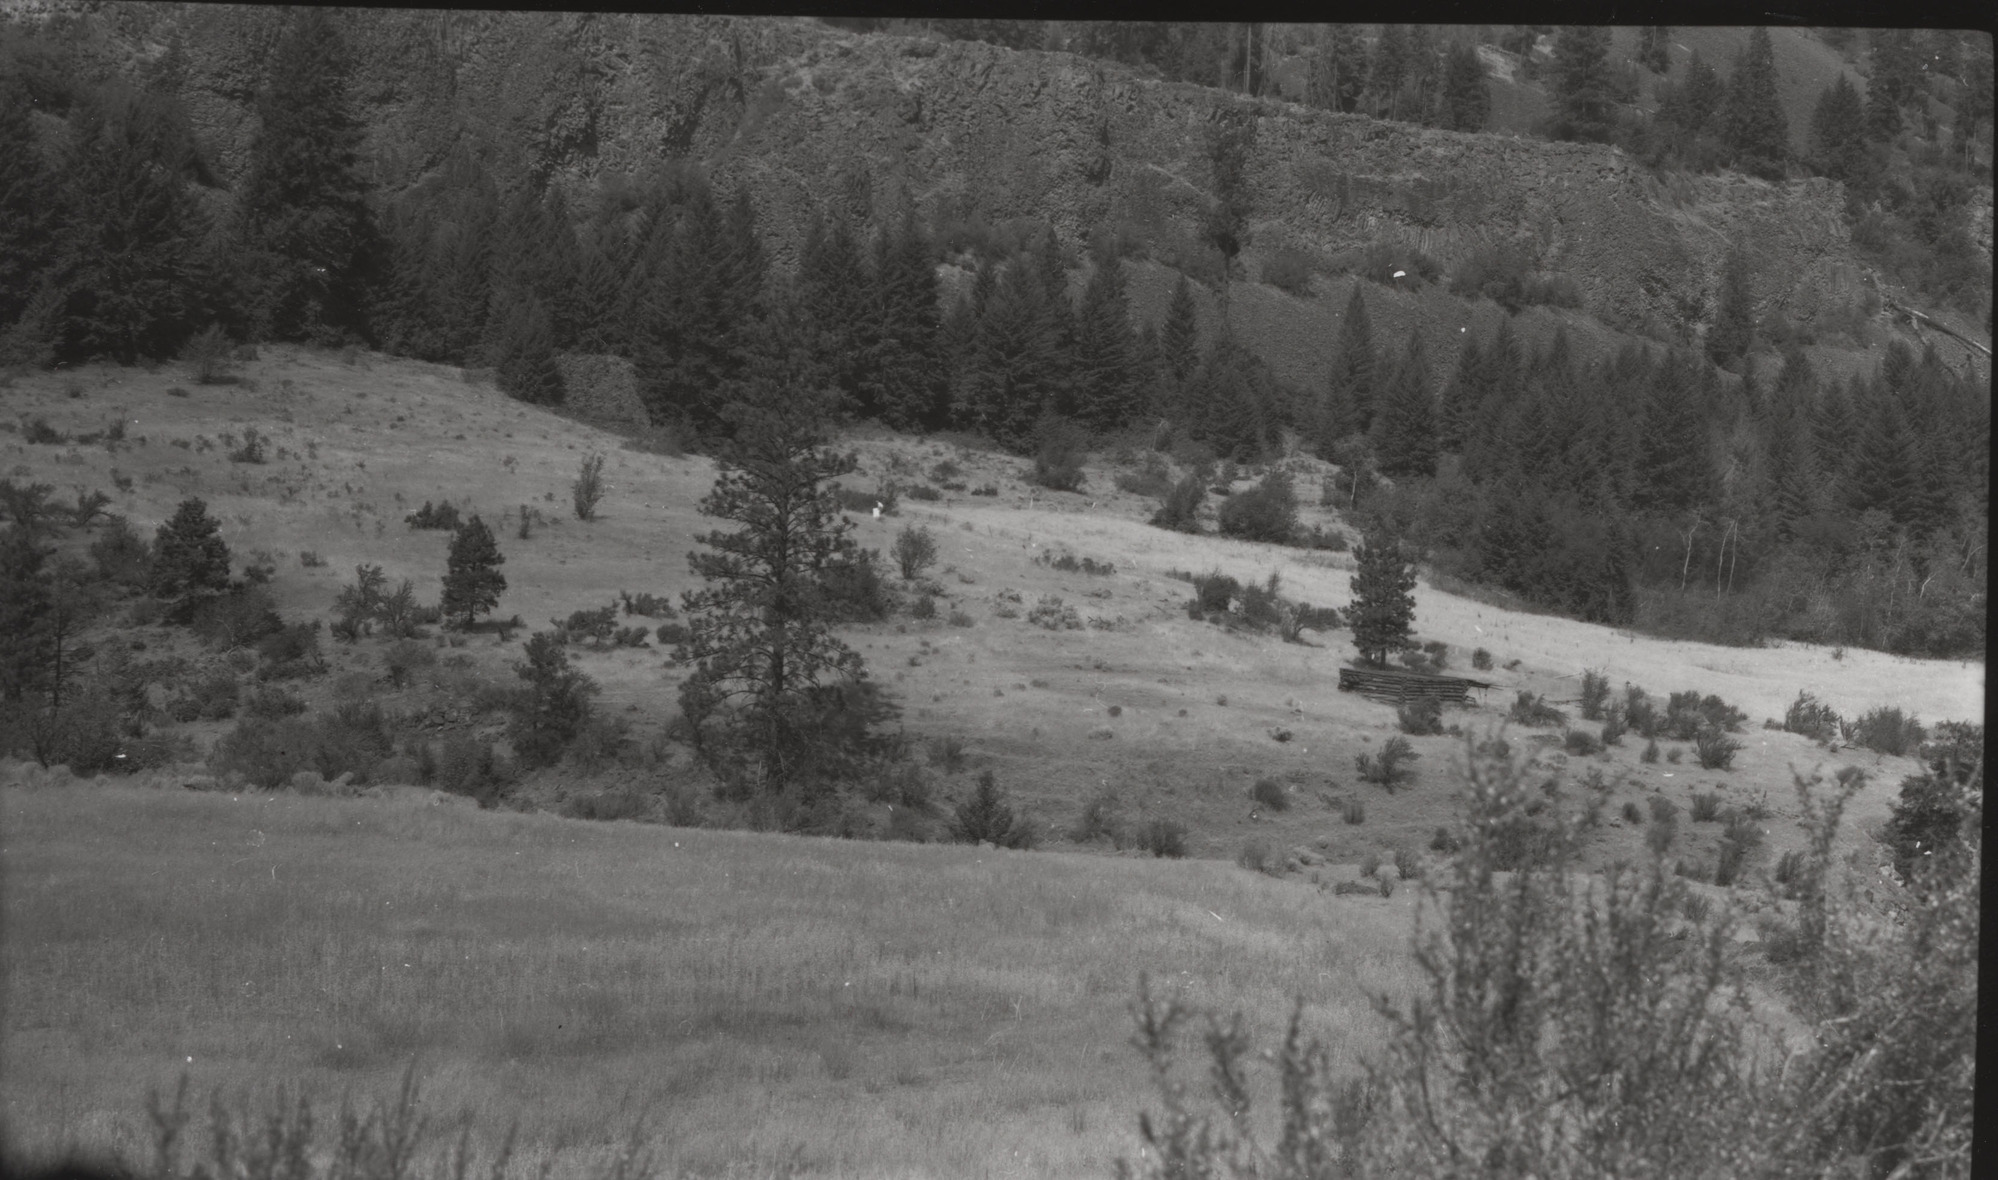 Black and white photograph of an open grassy area with a few trees and shrubs and steep rocky cliffs in the background.